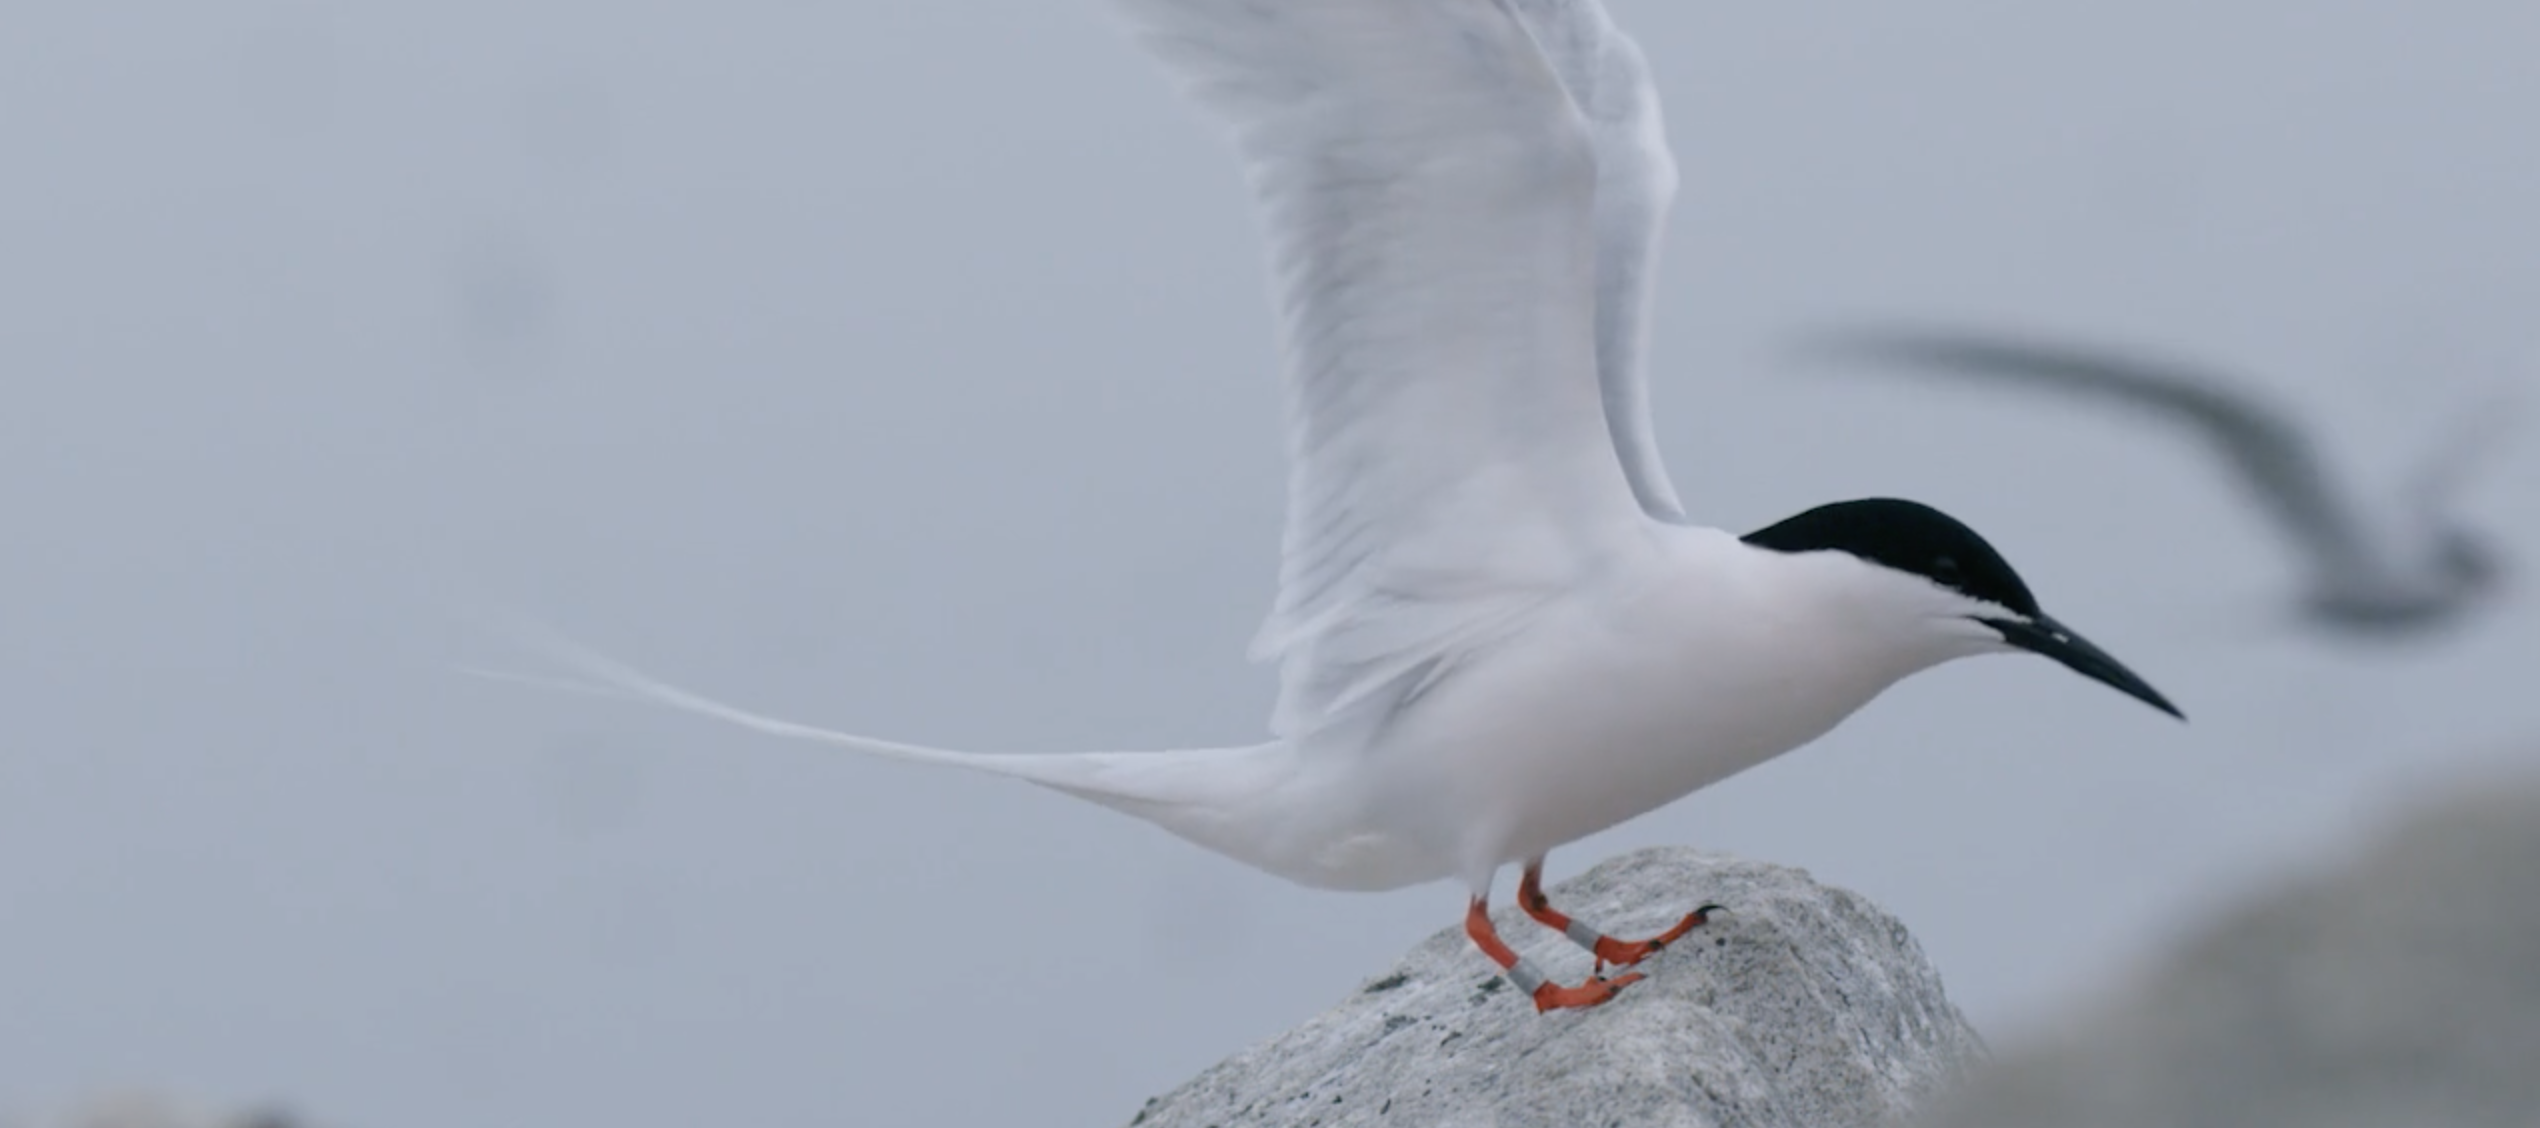 A small white bird with black feathers on its head, a black beak, and orange feet with tracking bands on them, rests on a rock with its wings outstretched. The background behind the bird is hazy.